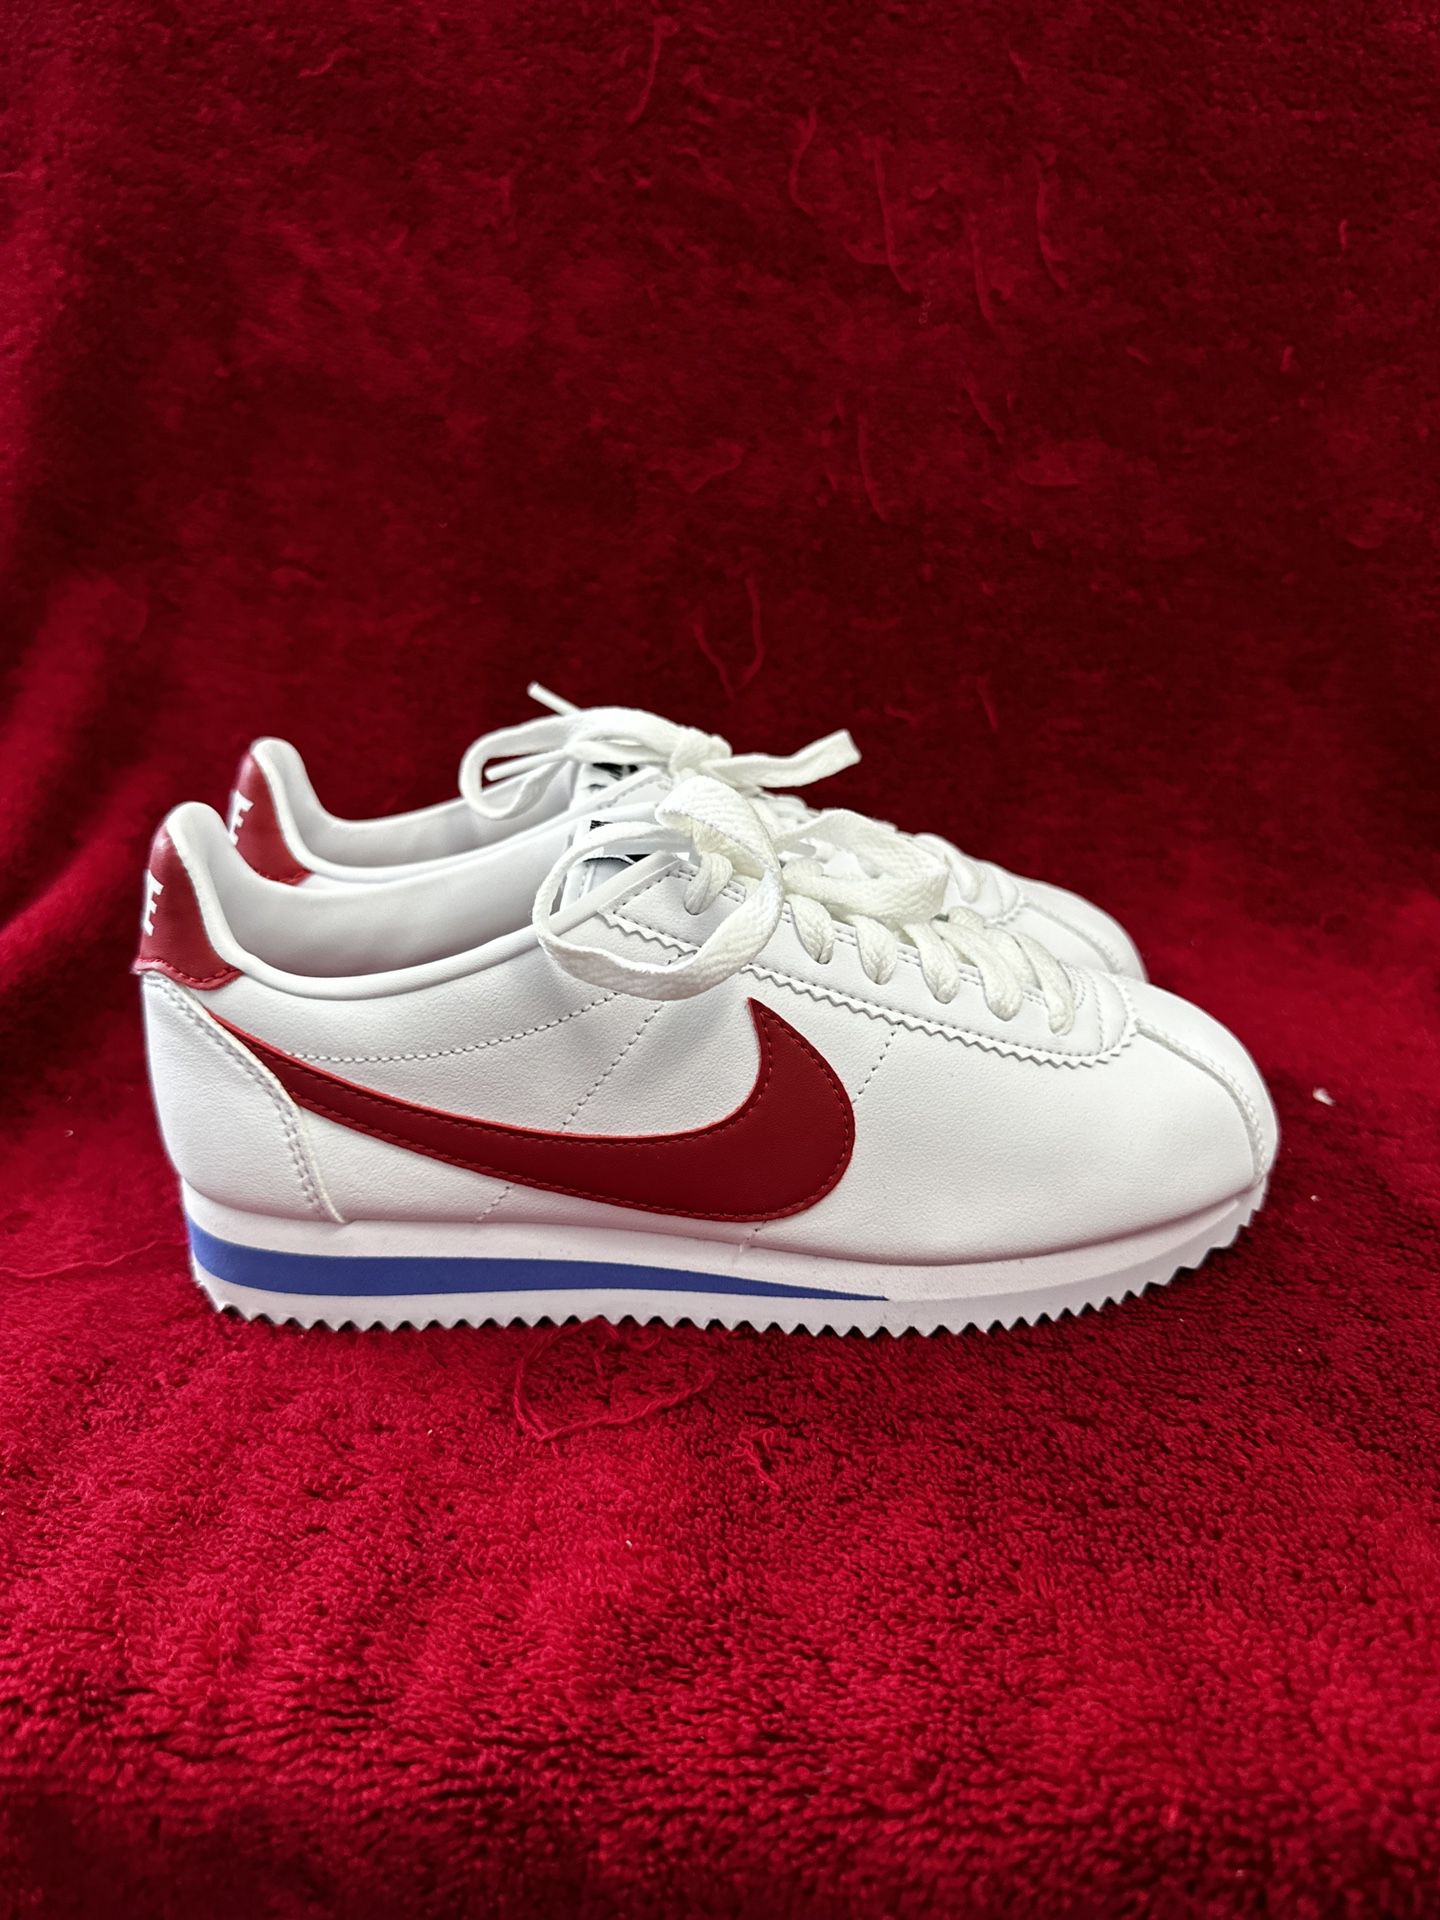 Nike Classic Cortez OG Streetwear Shoes USA 807471-103 Size 6 for Sale in San Diego, CA -